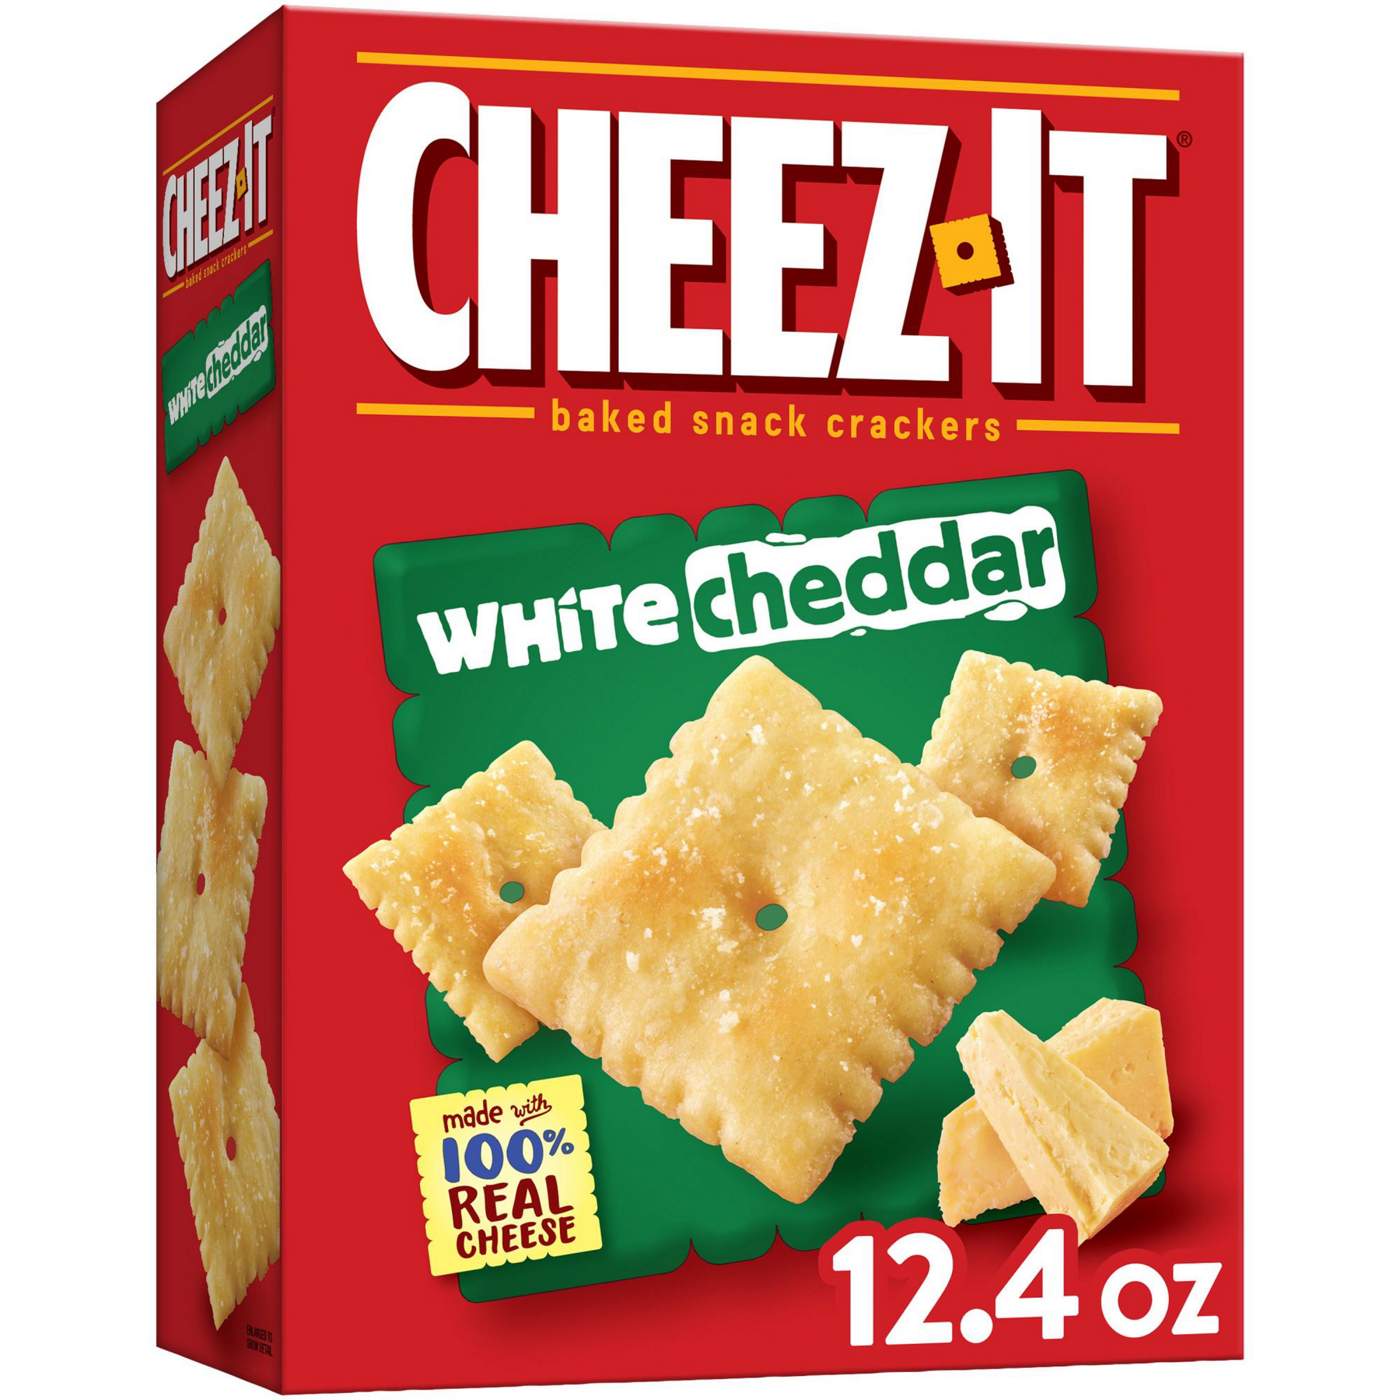 Cheez-It White Cheddar Cheese Crackers; image 3 of 4